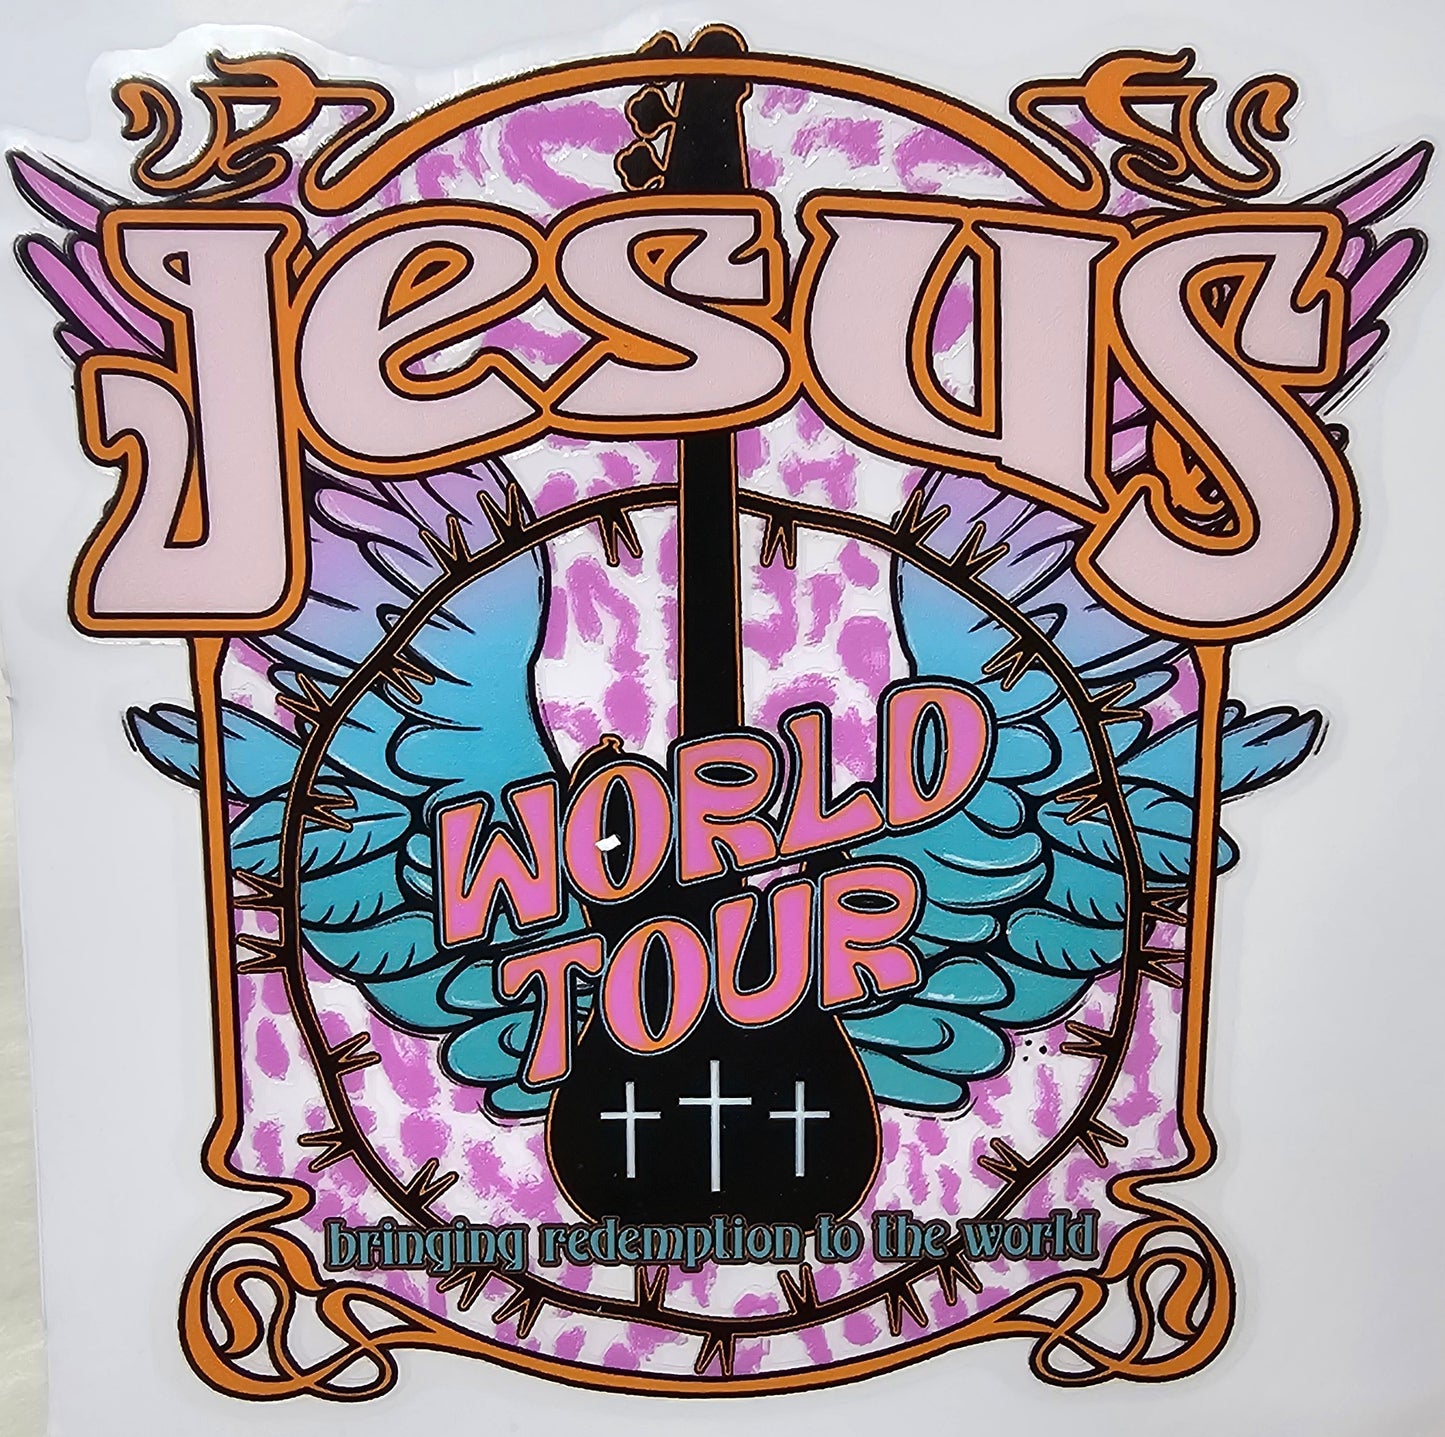 'Jesus World Tour Bringing Redemption To The World' Guitar Western UV Transfers